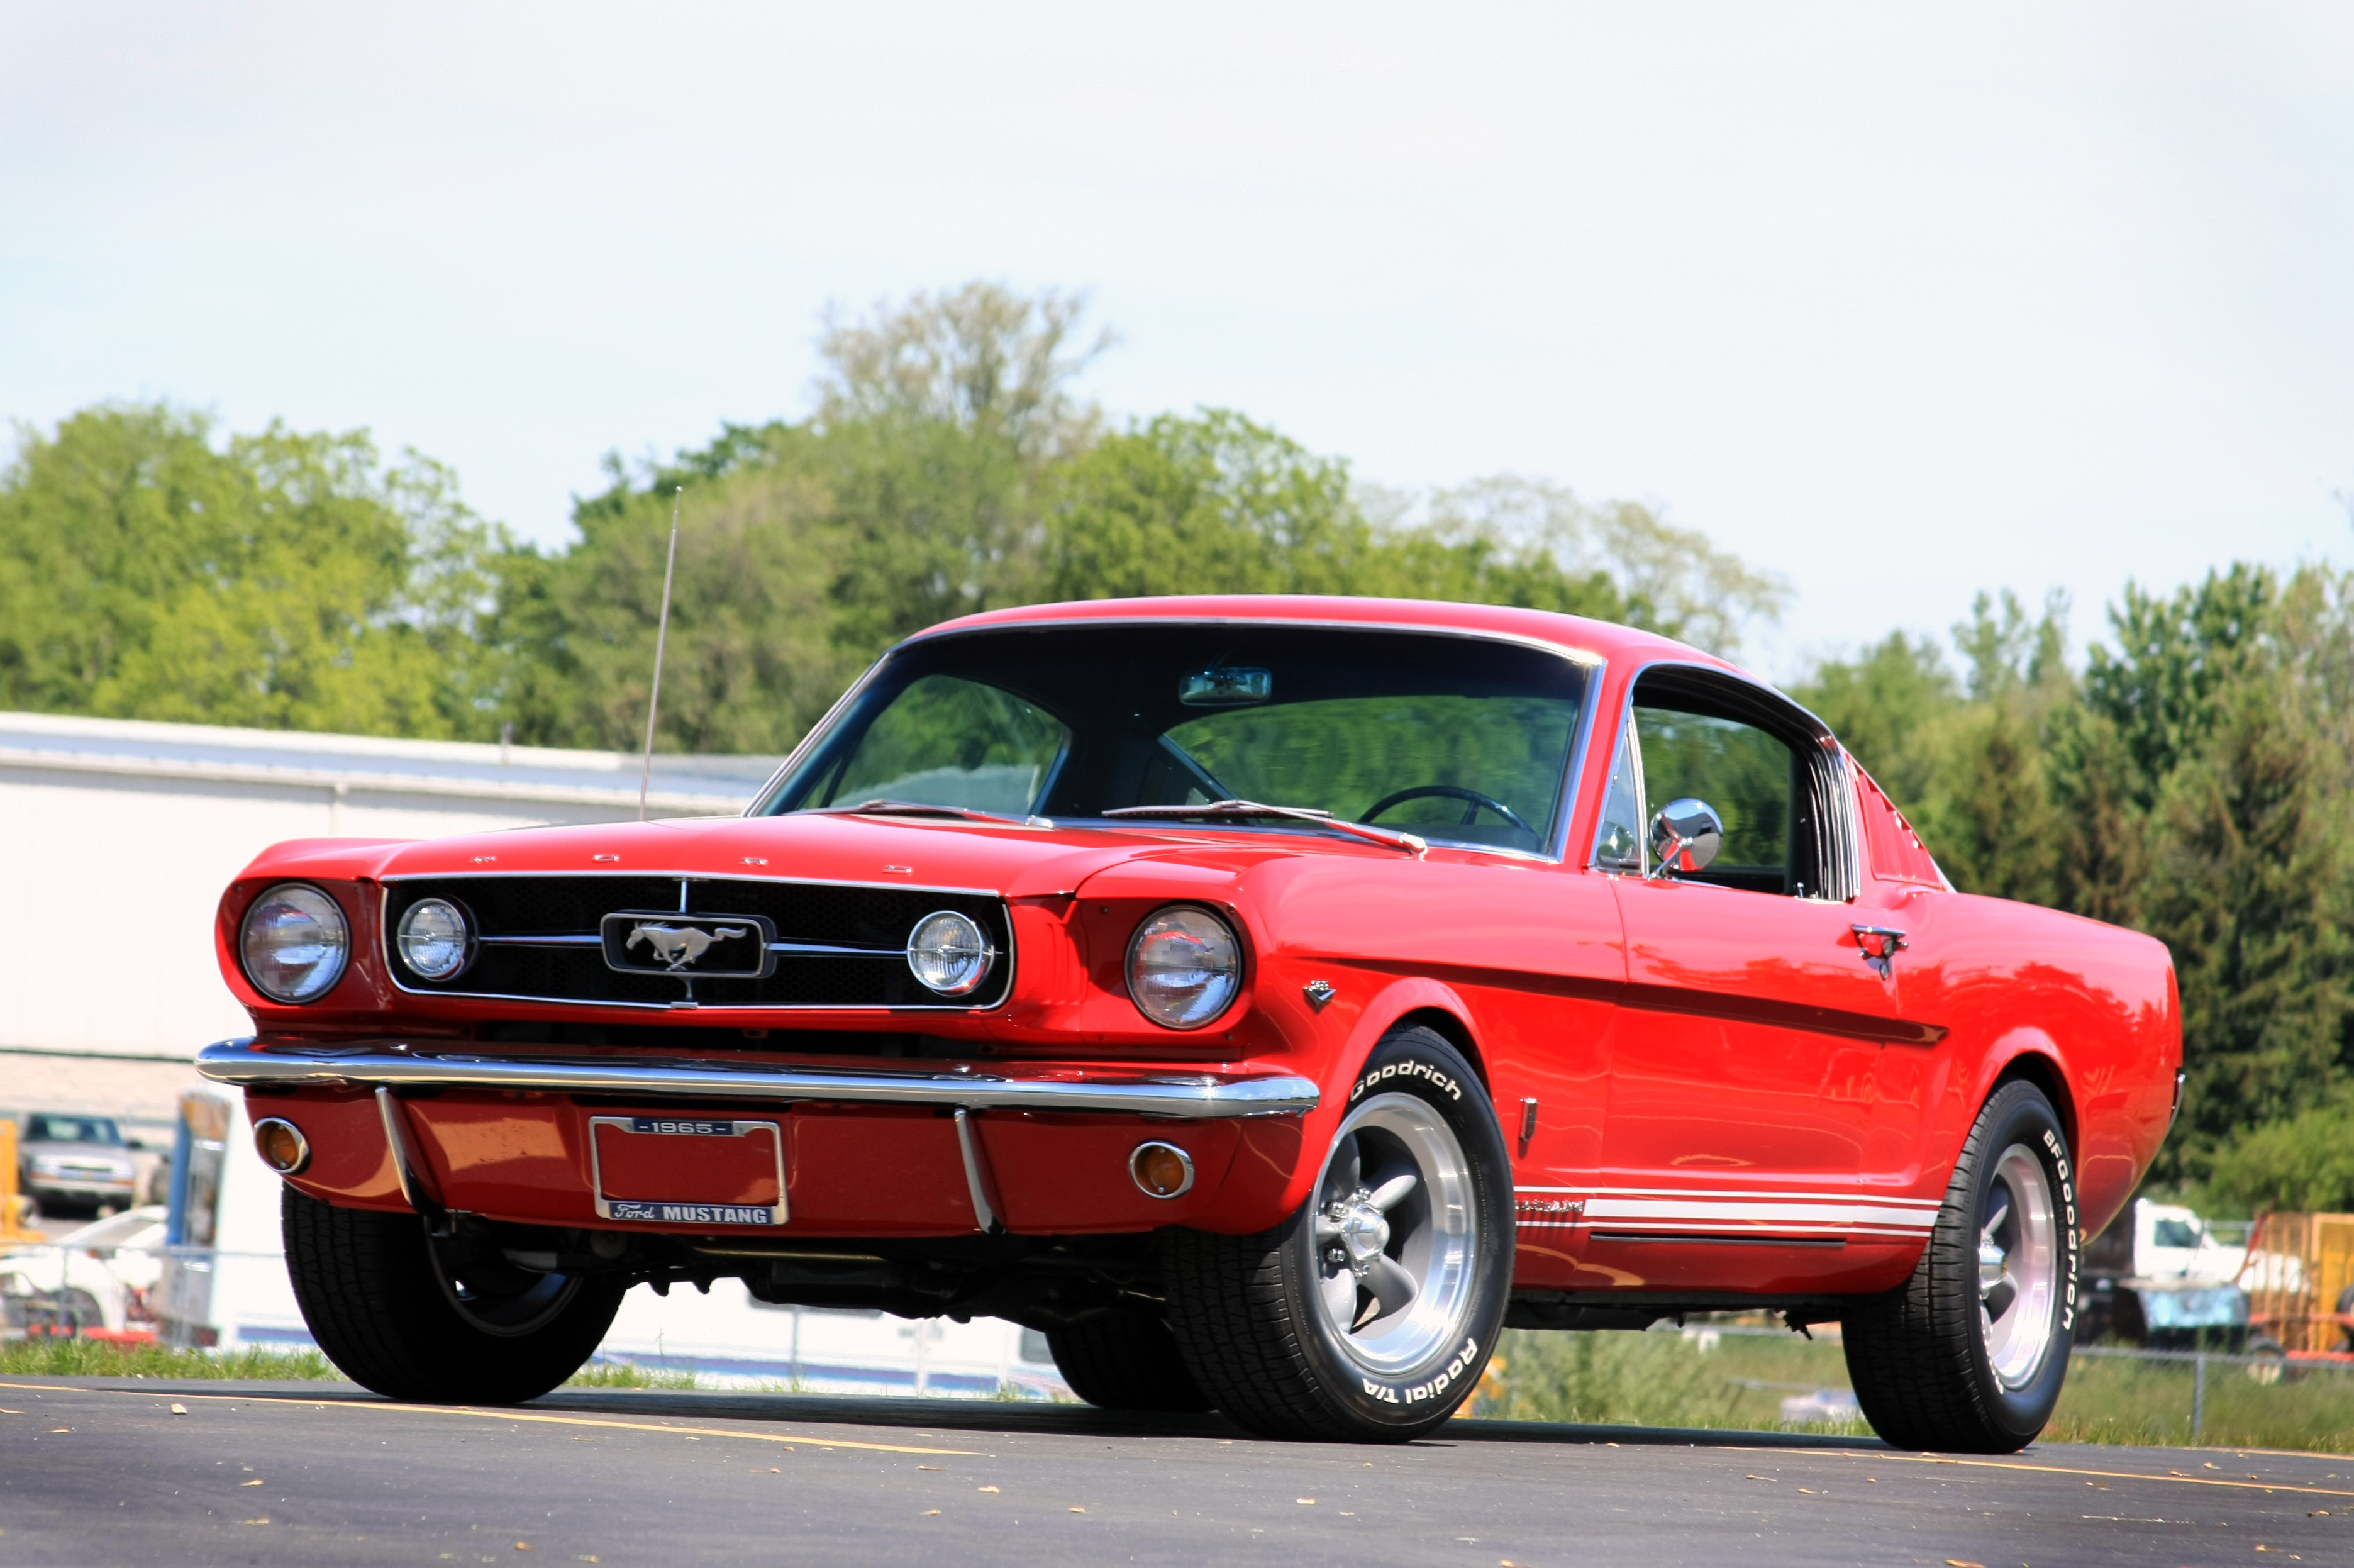 Fastback Ford Ford Mustang Muscle Car Red Car 3743x2493